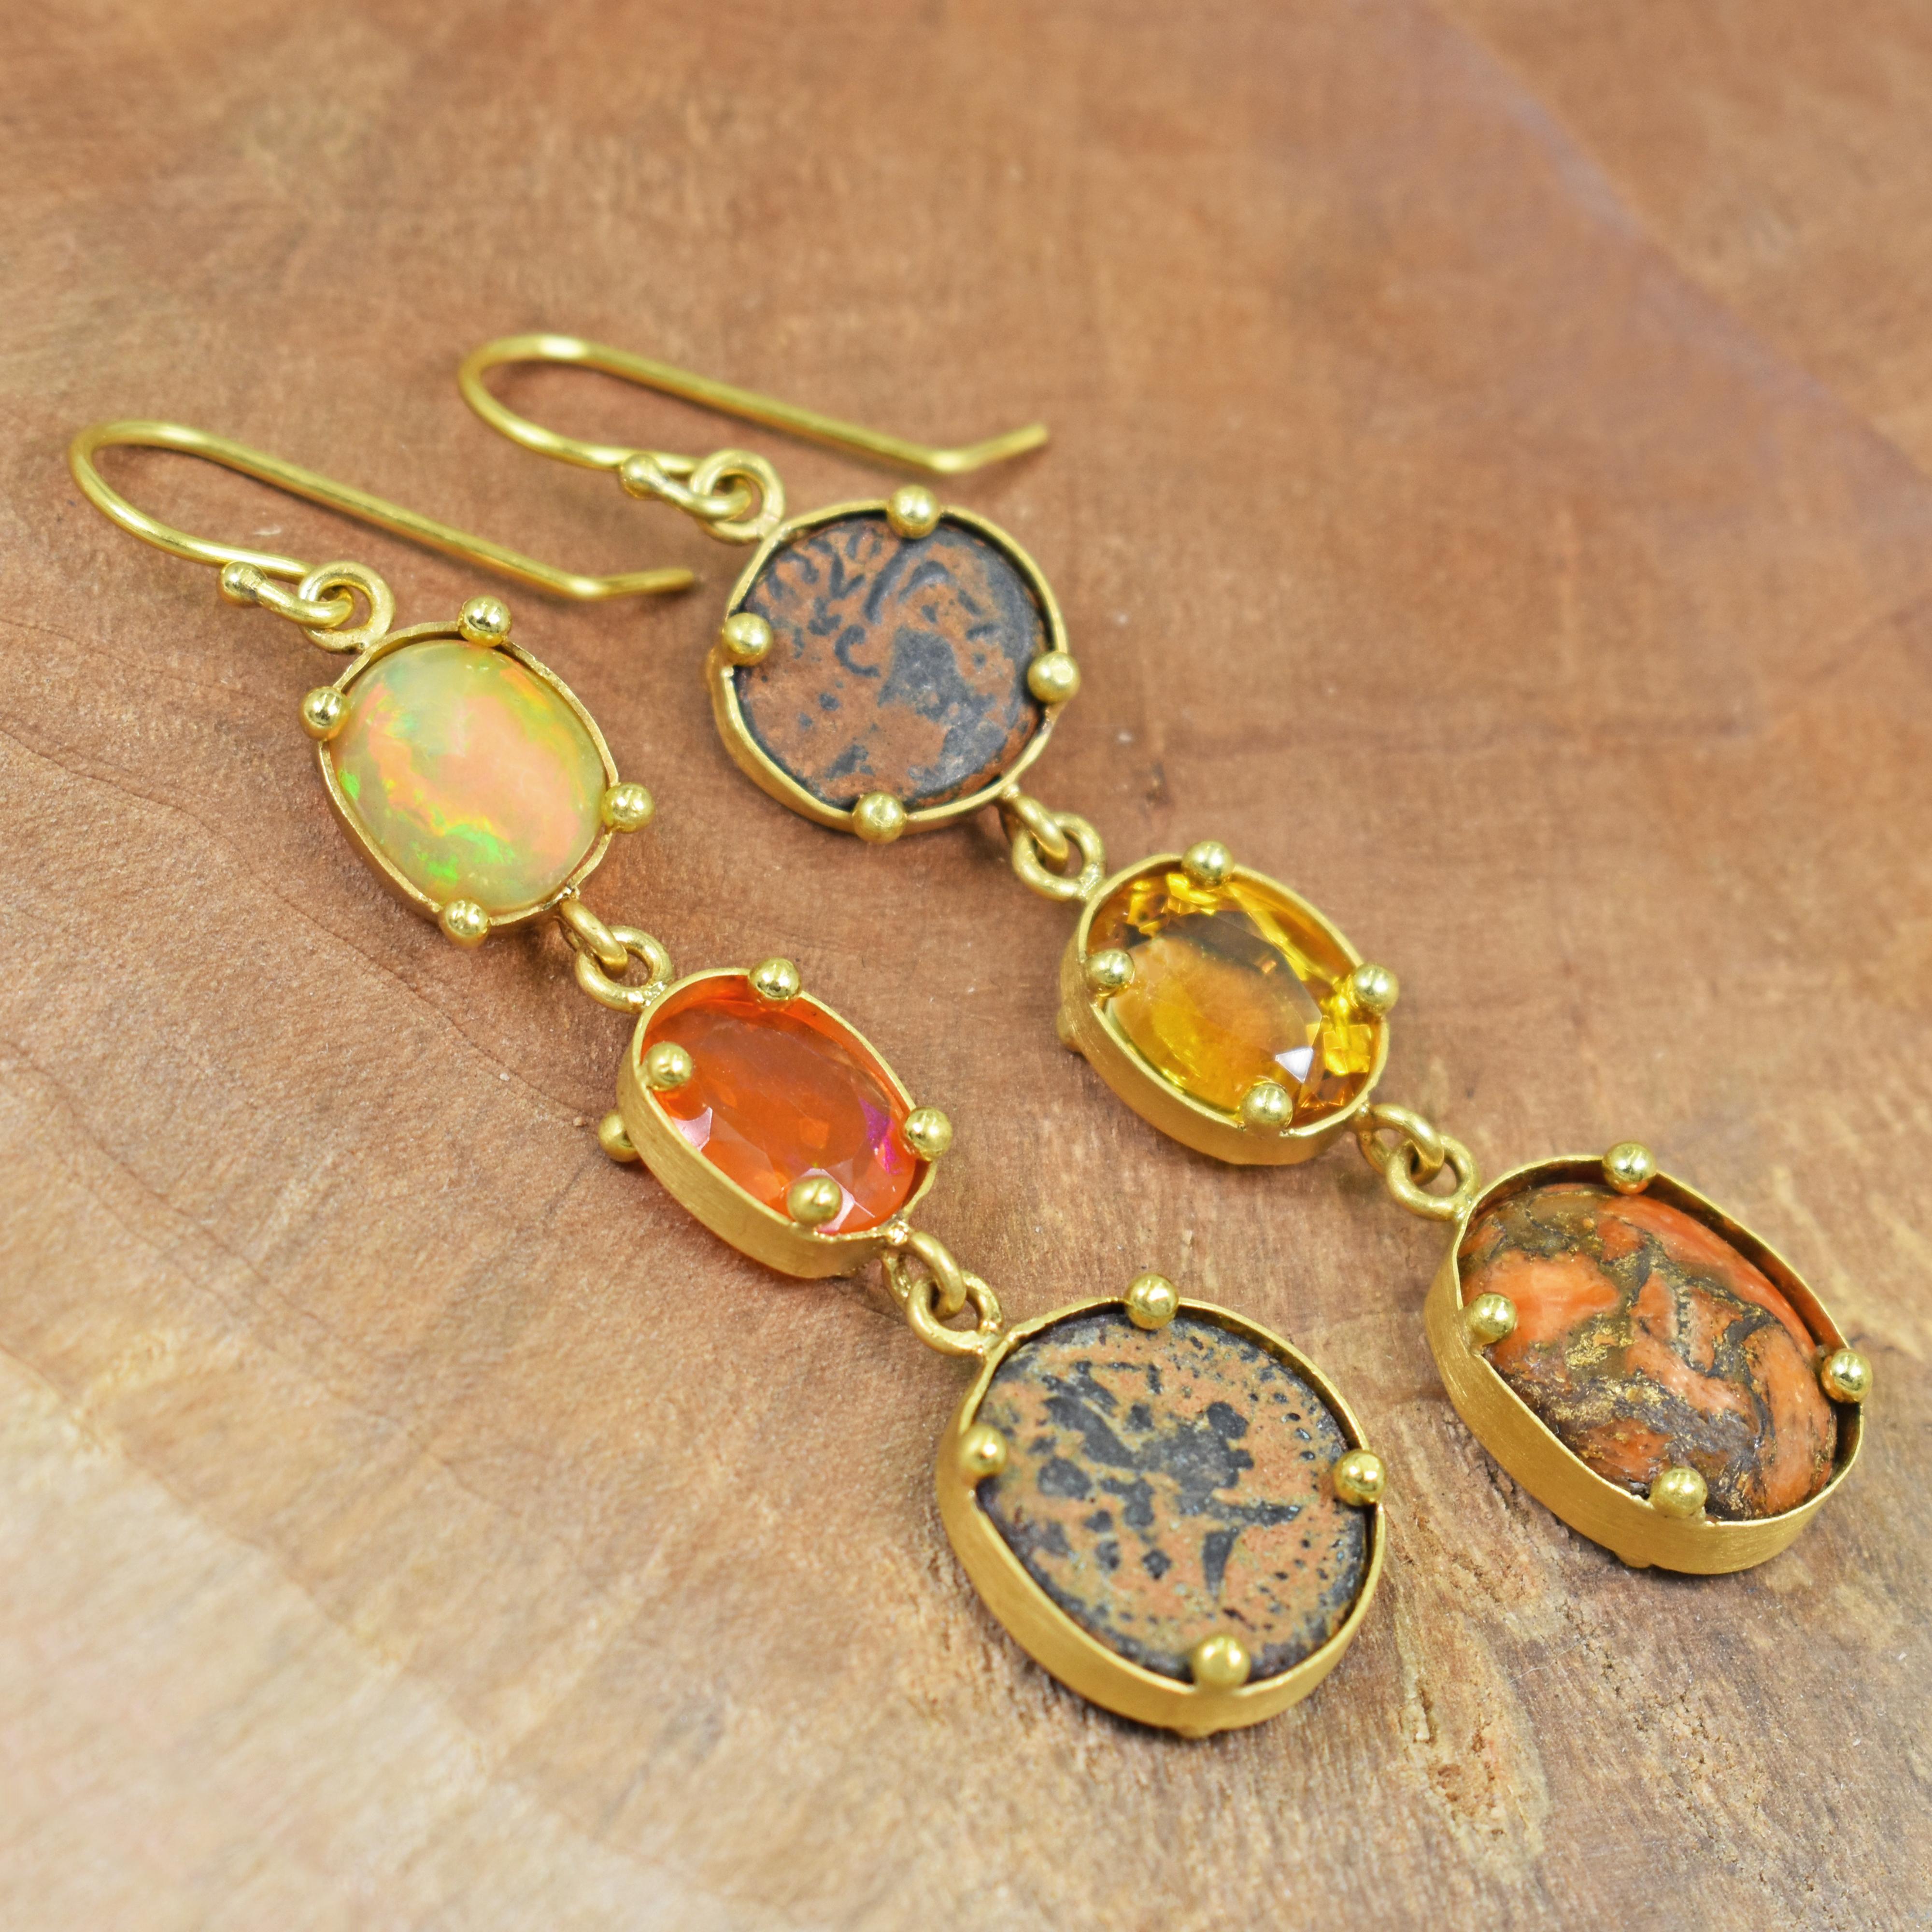 Unique, multi-gemstone and authentic ancient Greek bronze coins (3rd to 1st century AD) set in 22k yellow gold asymmetrical dangle earrings. Earrings feature Ethiopian Opal, Jasper, Citrine and Fire Opal gemstones. Greek coins have a brownish